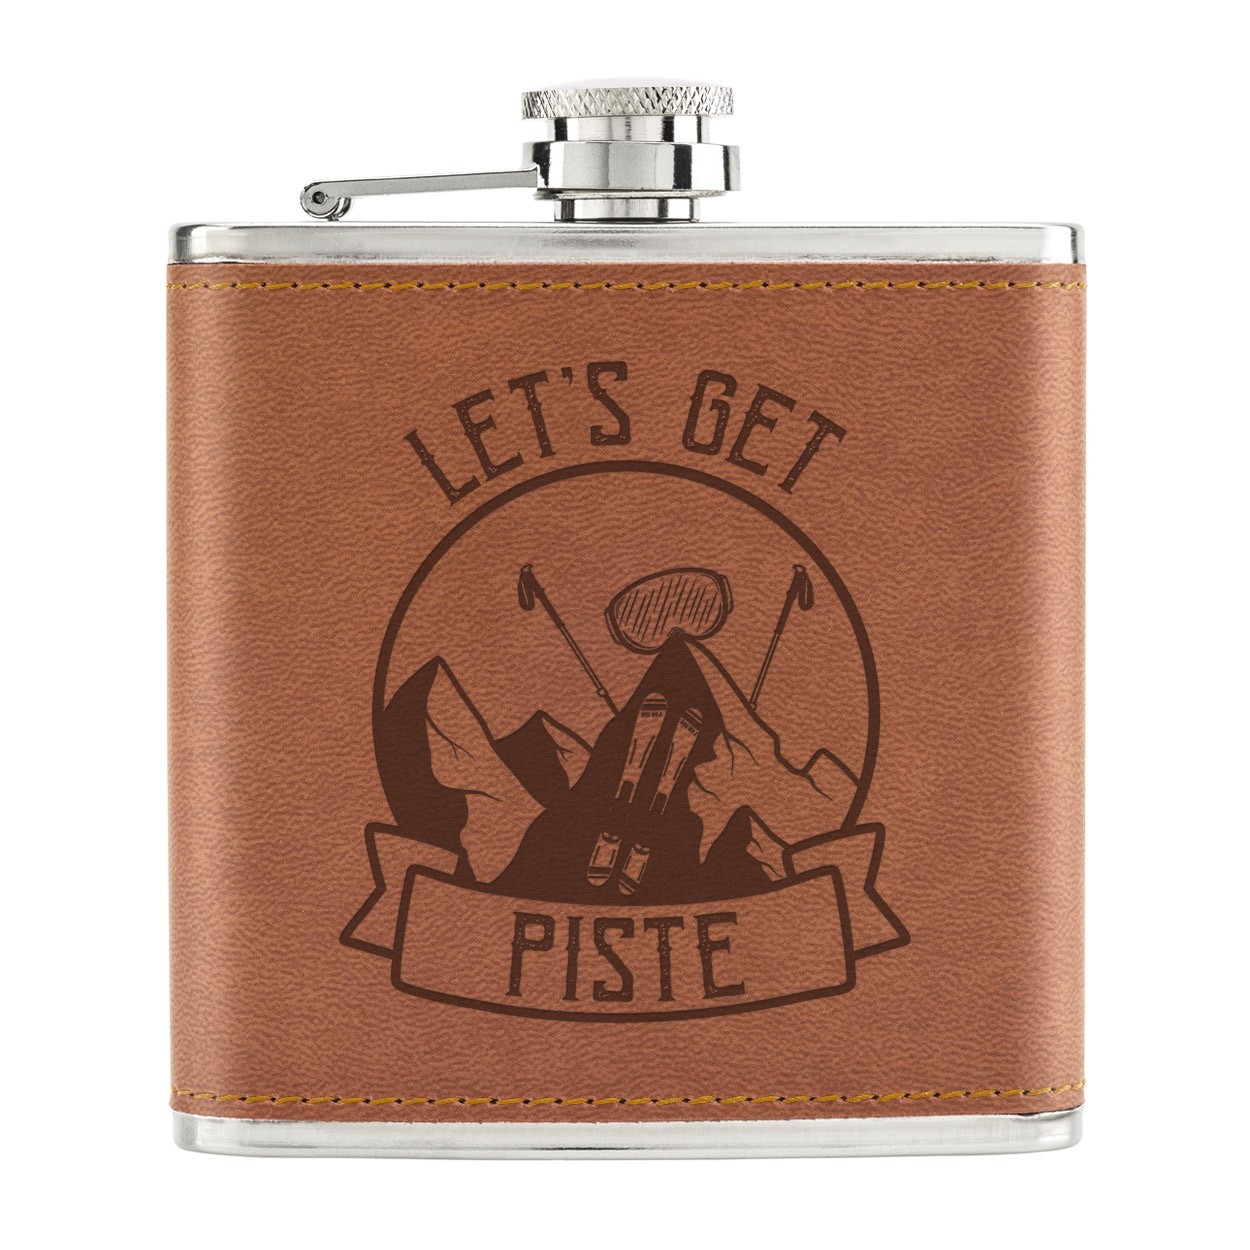 Let's Get Piste Pissed Skiing 6oz PU Leather Hip Flask Tan